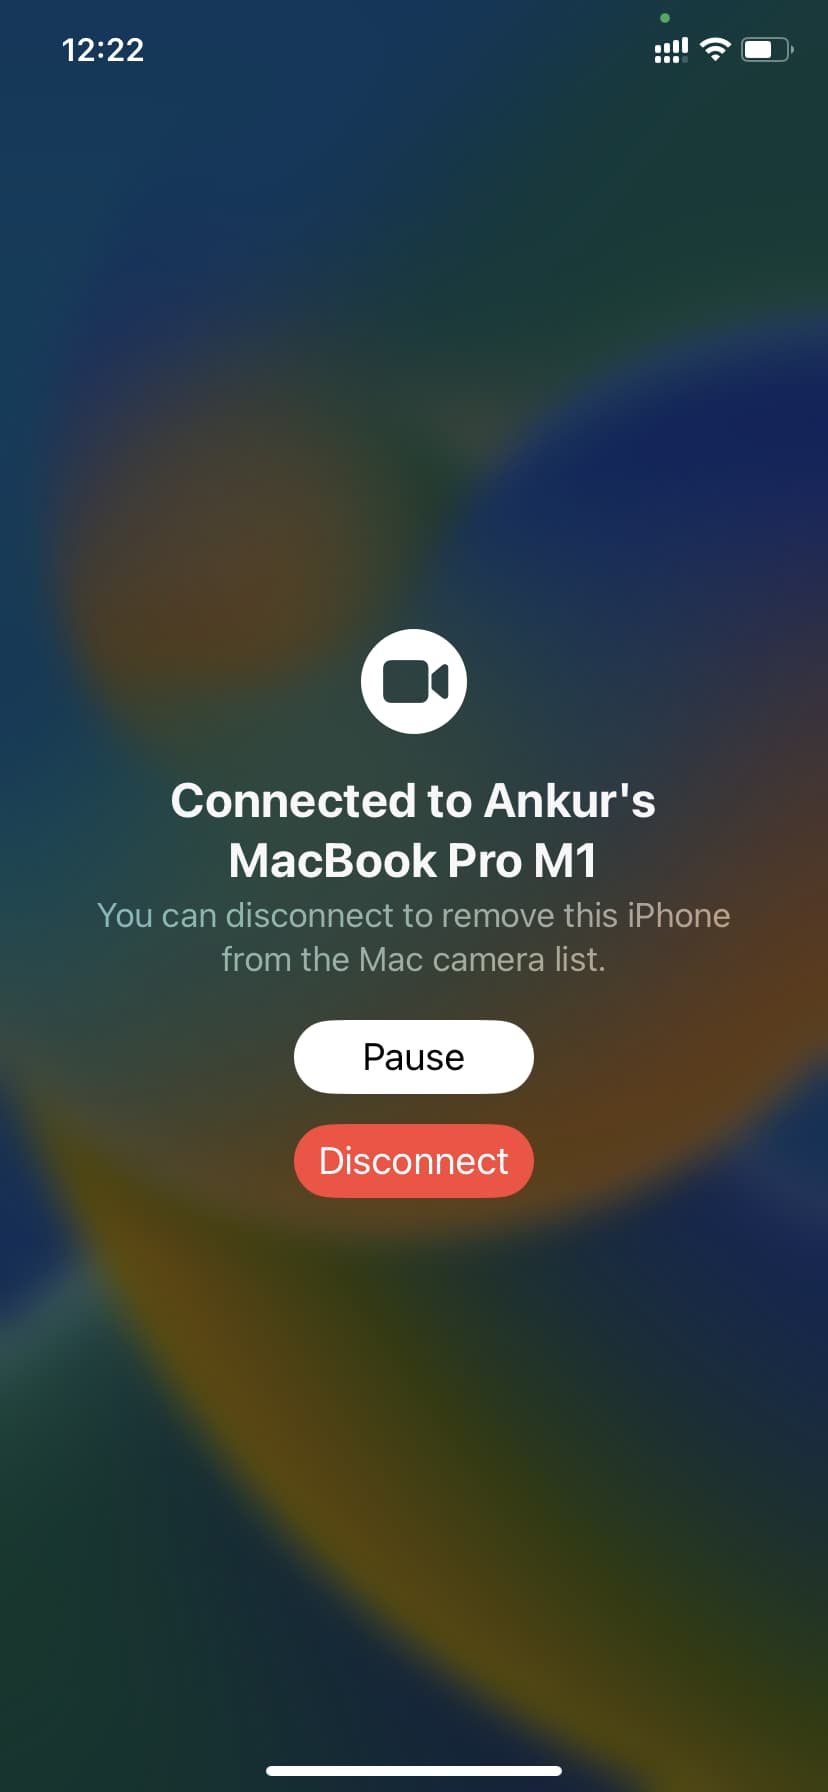 Pause or Disconnect iPhone as webcam on Mac